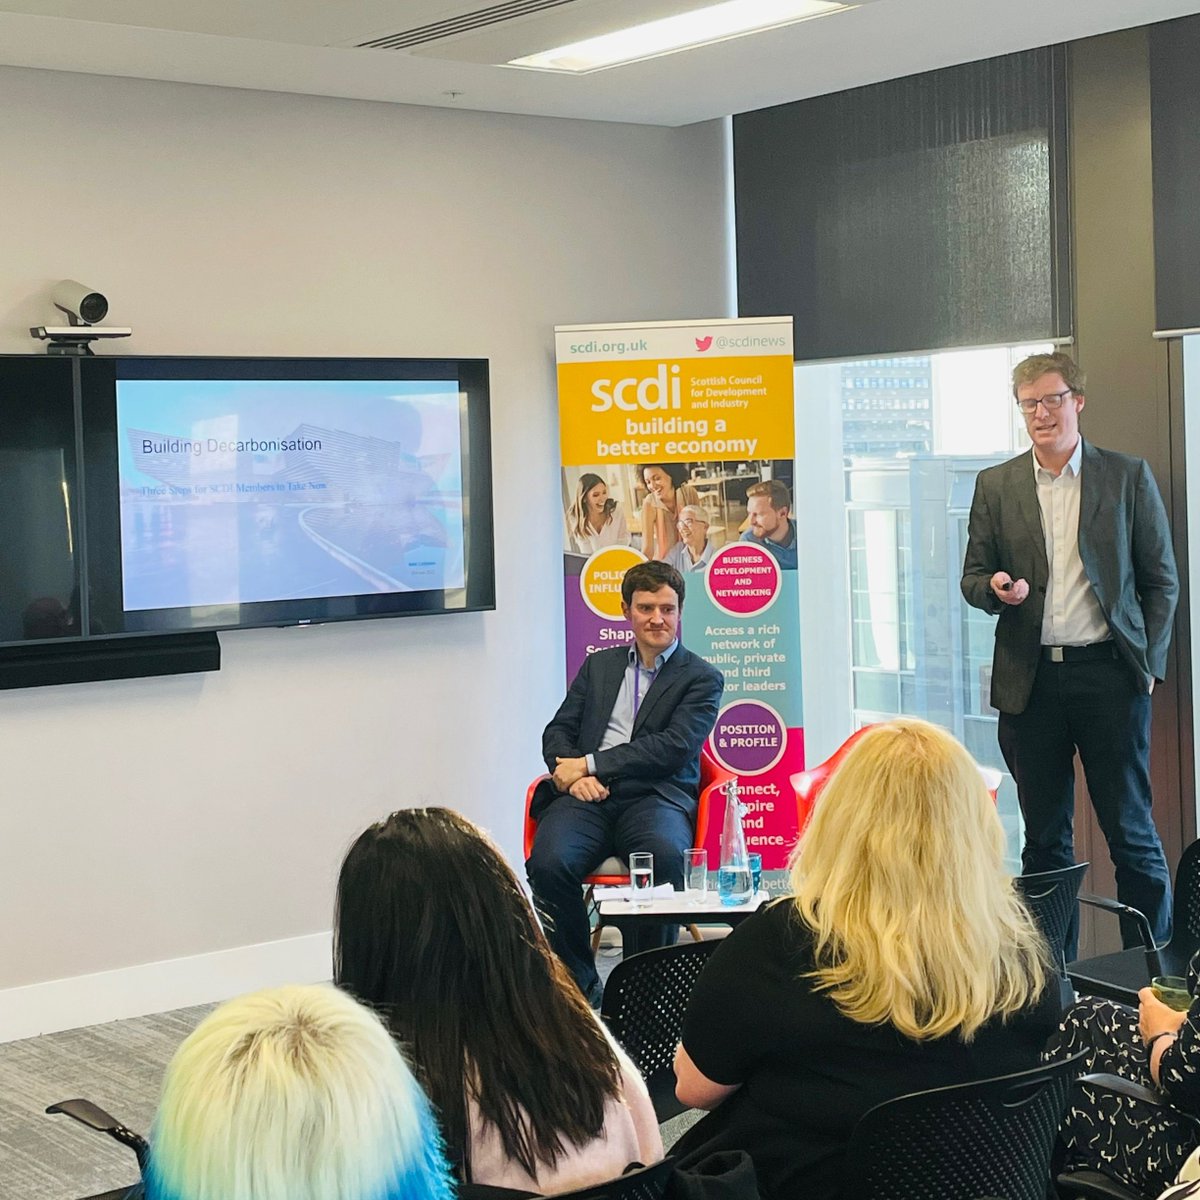 Delighted to welcome @SCDInews this afternoon in our Glasgow office for an event on the #decarbonisation of buildings, with speakers from #Arup, @CMS_Scotland and @UniStrathclyde.